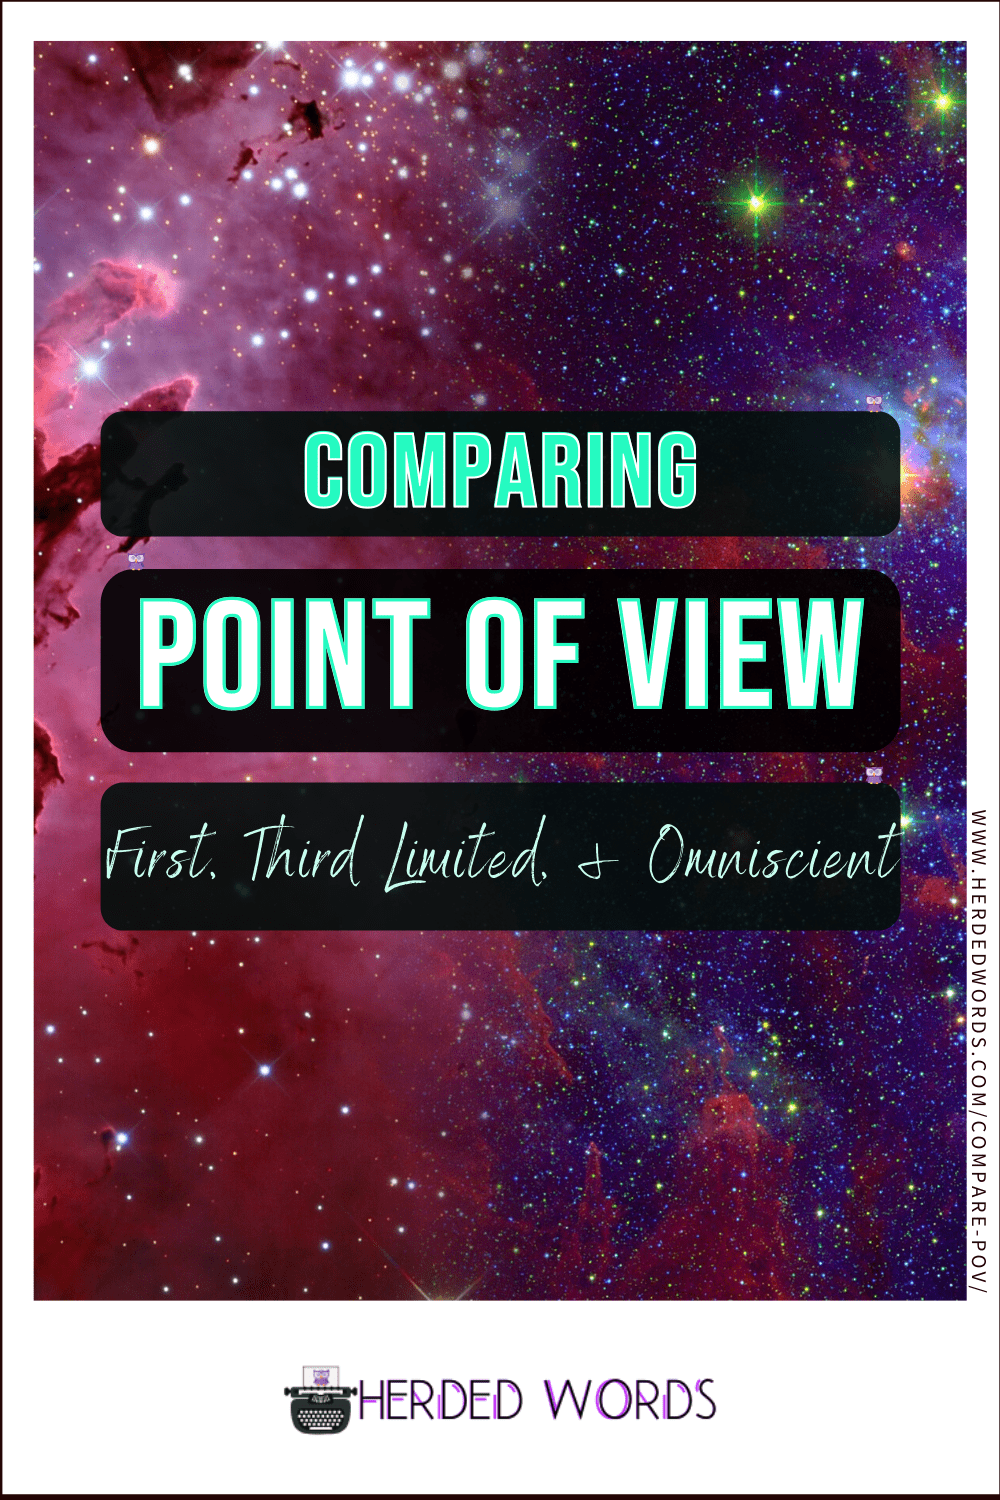 Image Link to Comparing Point of View (first, third limited, and omniscient)